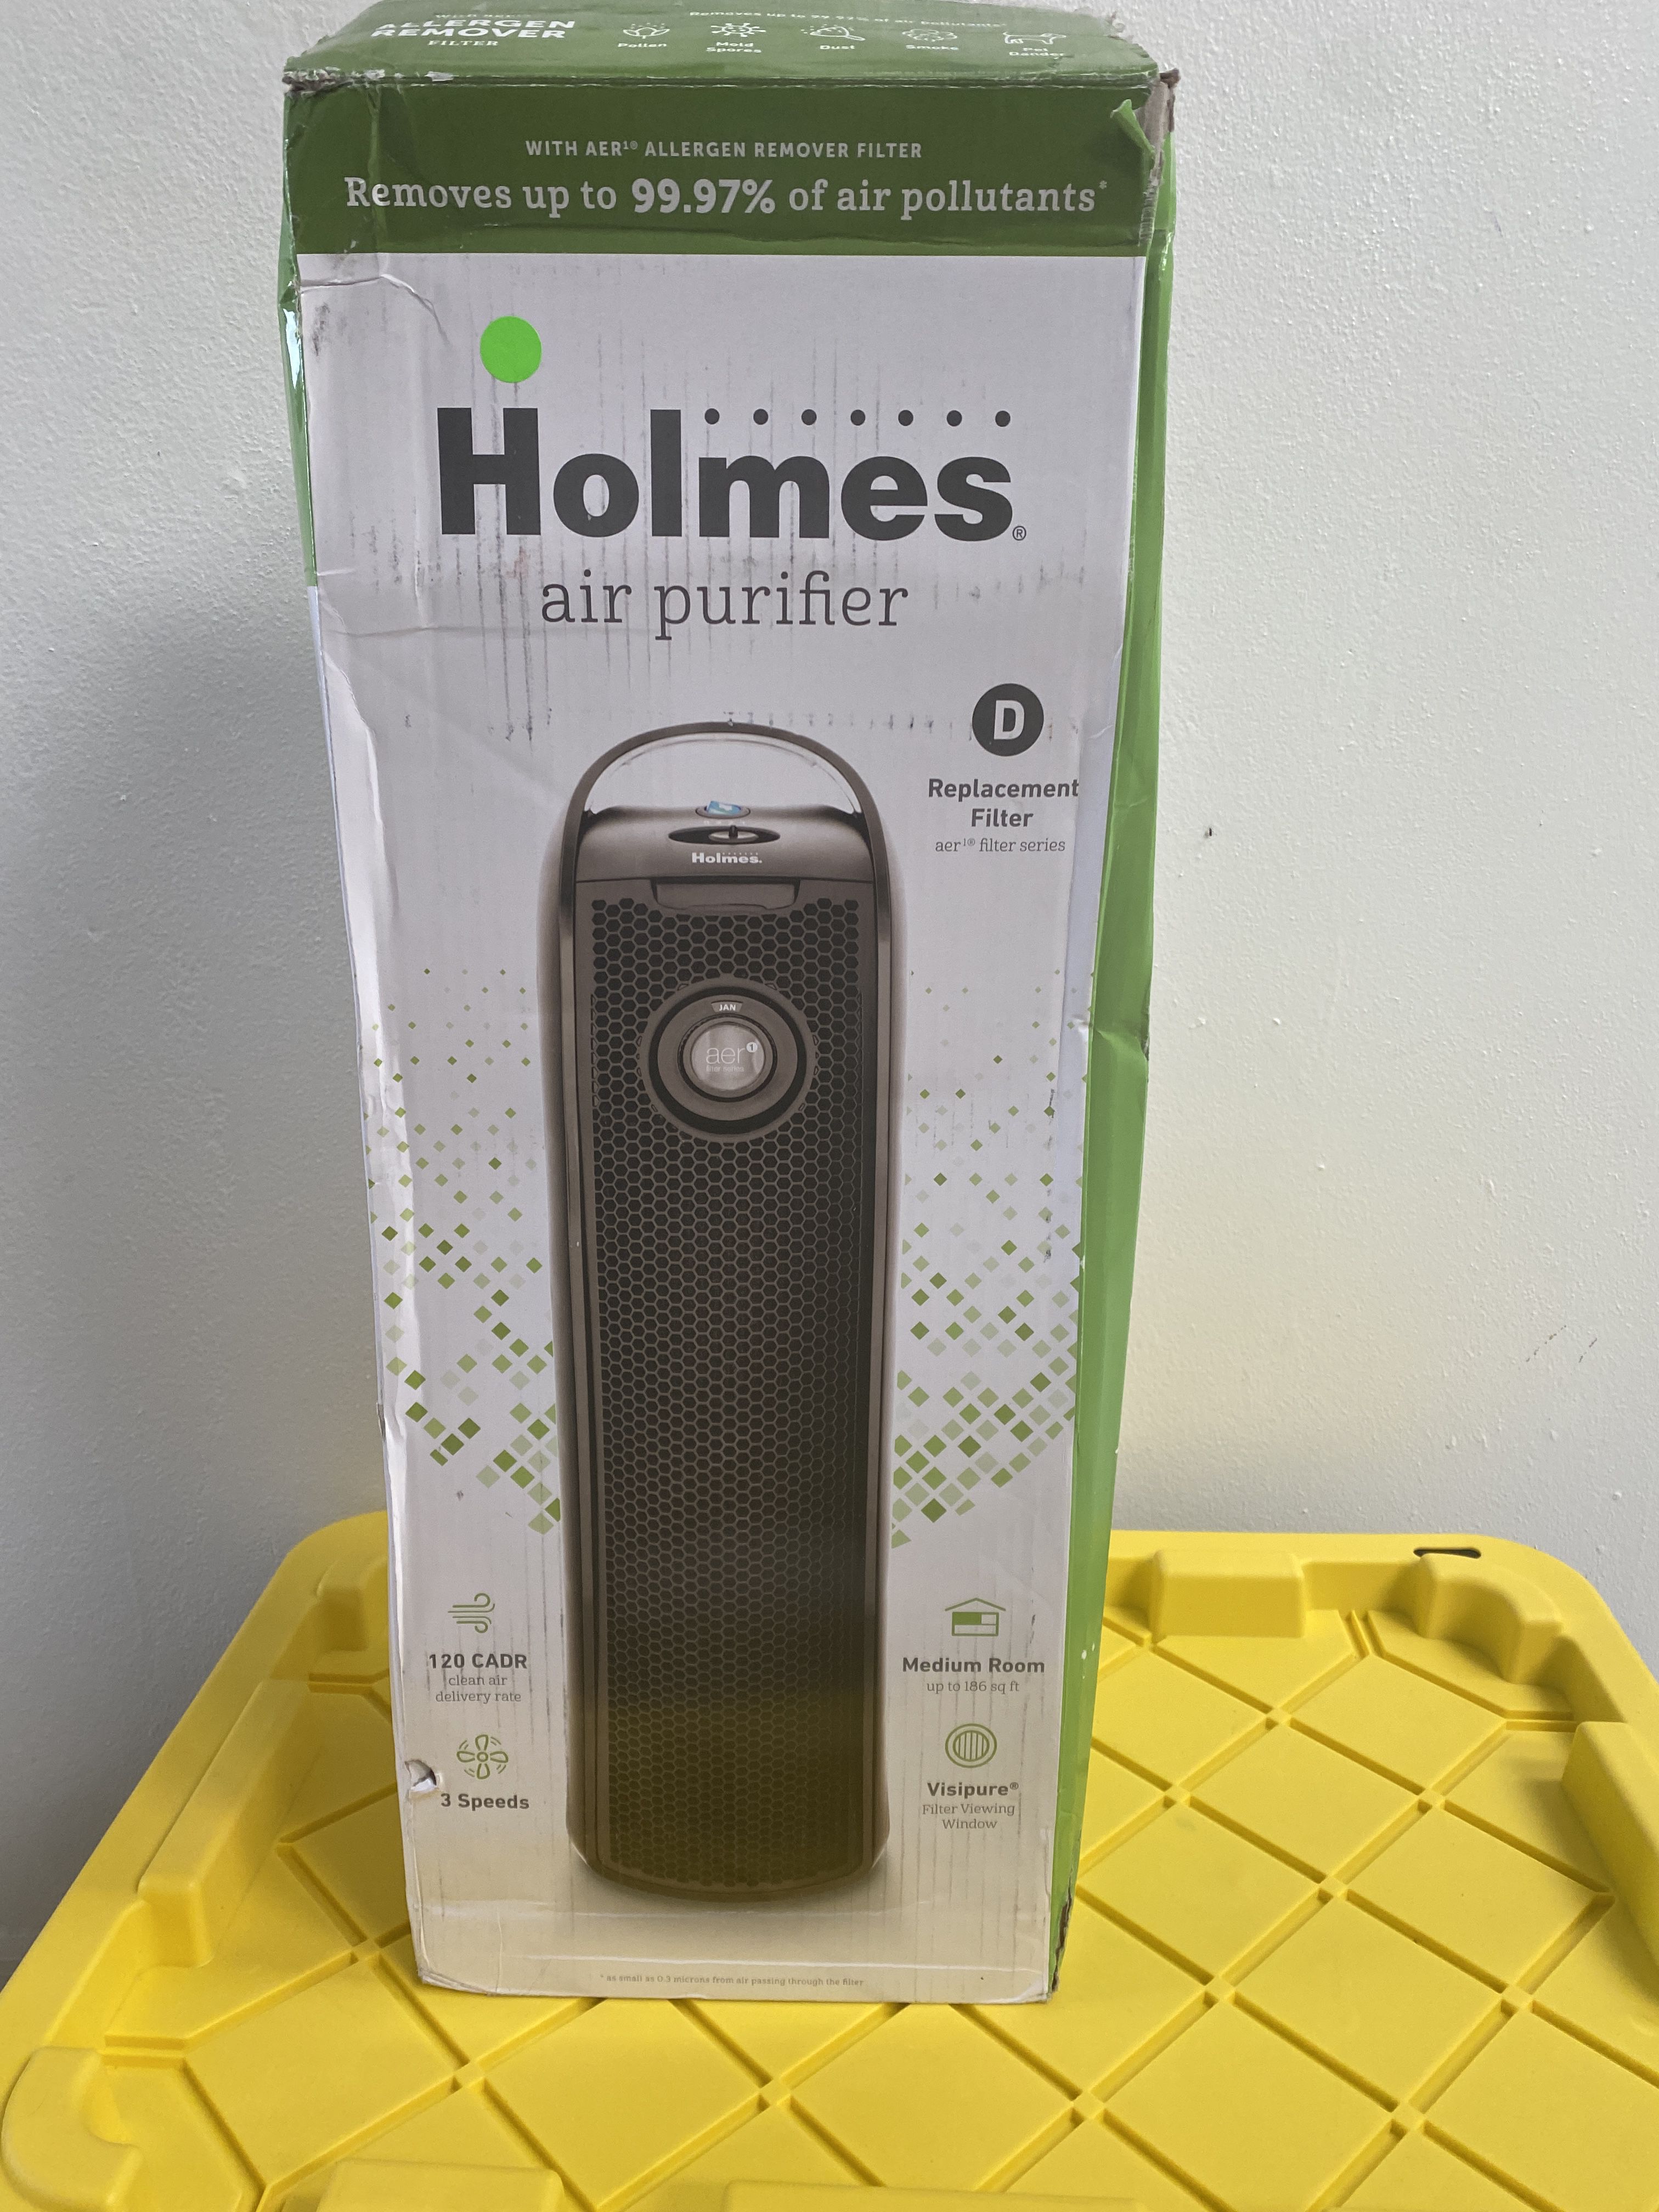 Holmes Tower Aer1 HEPA Air Purifier with Visipure Filter Viewing Window